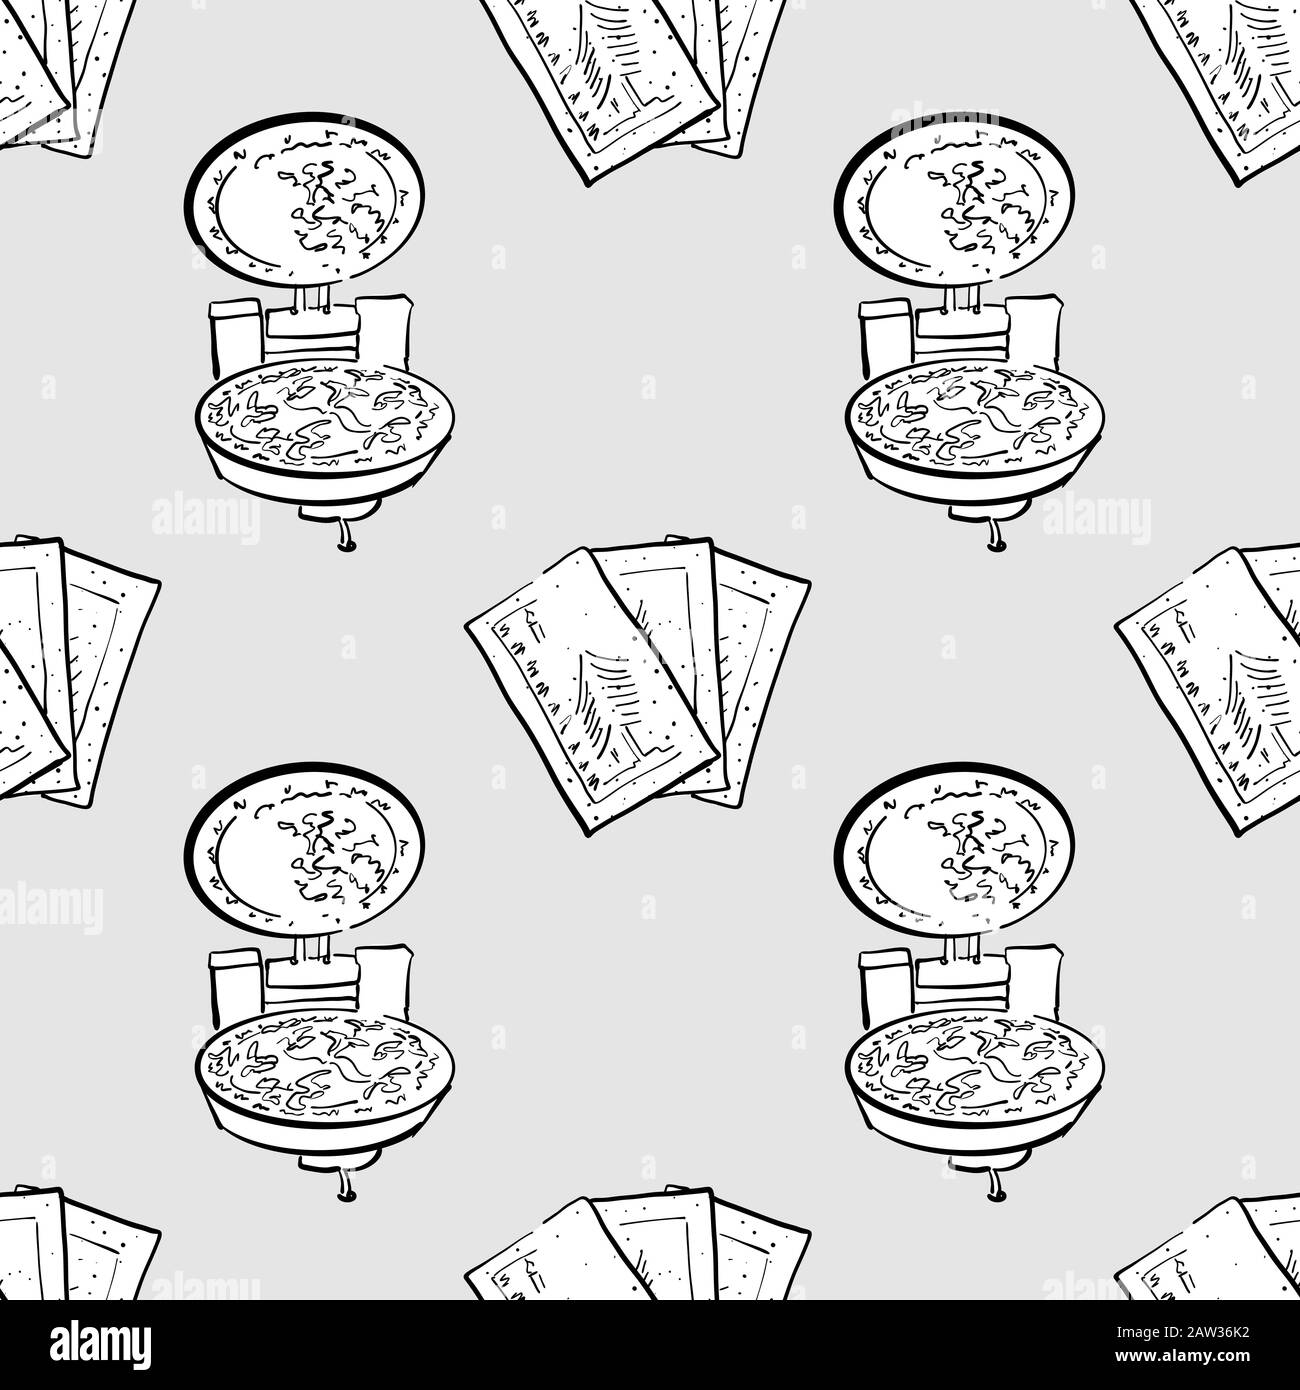 Christmas wafer seamless pattern greyscale drawing. Useable for wallpaper or any sized decoration. Handdrawn Vector Illustration Stock Vector